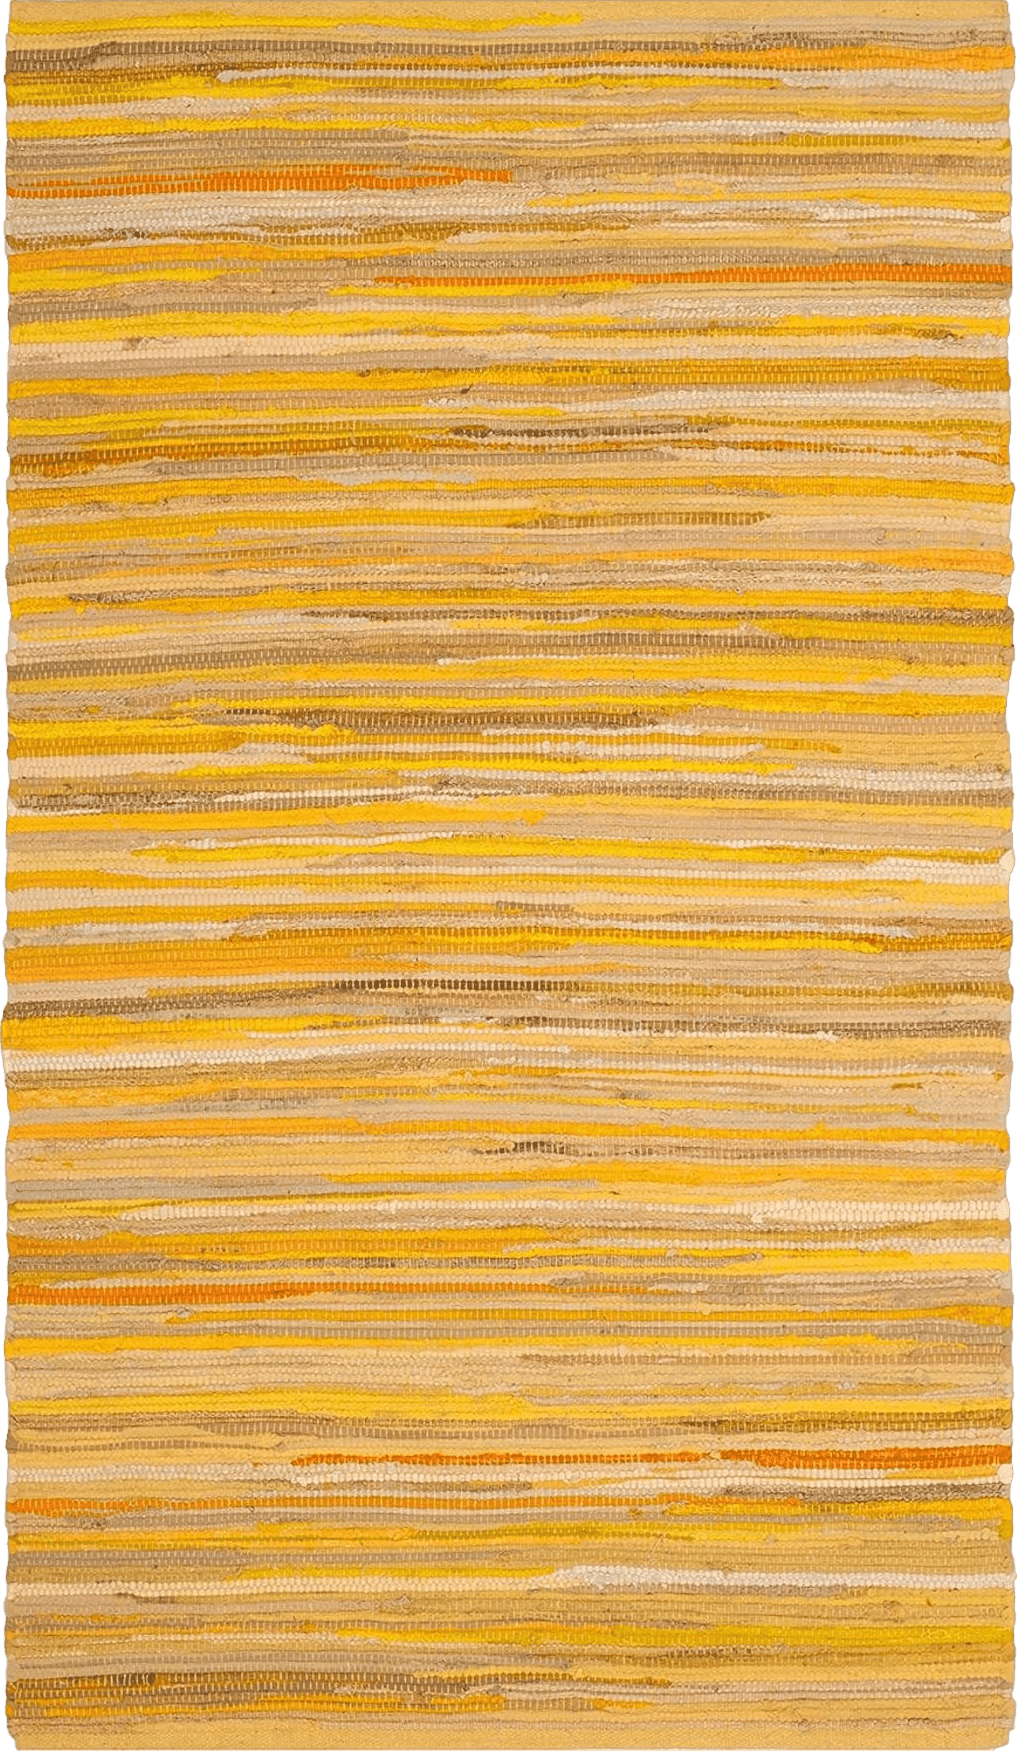 Chindi SAFAVIEH Rag Rug Collection Accent Rug - 3' x 5', Yellow & Multi, Handmade Boho Stripe Cotton, Ideal for High Traffic Areas in Entryway, Living Room, Bedroom (RAR130H)